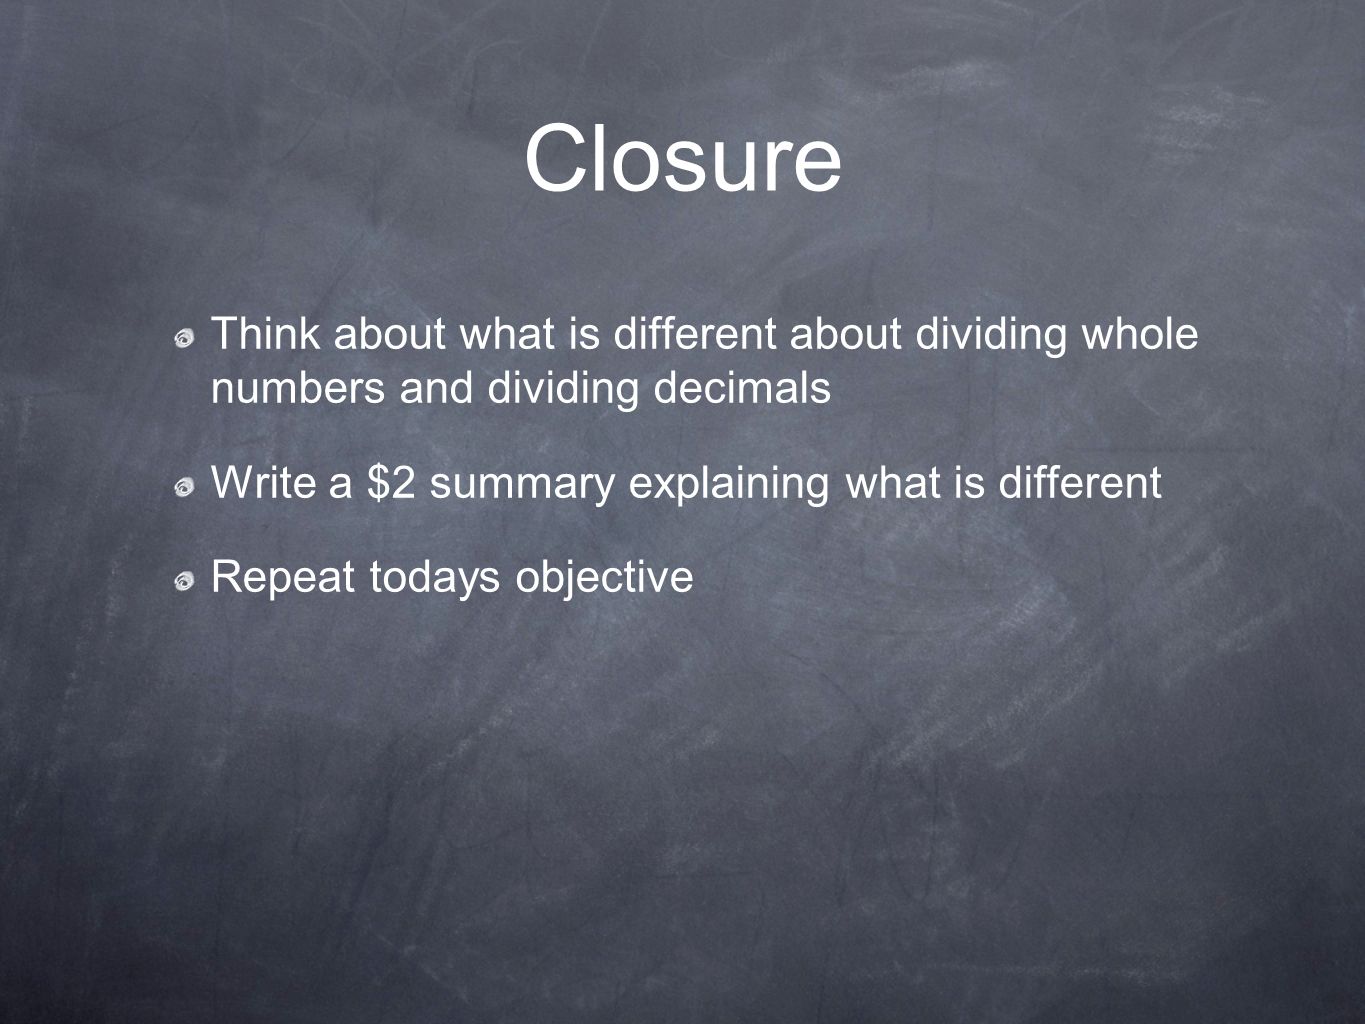 Closure Think about what is different about dividing whole numbers and dividing decimals. Write a $2 summary explaining what is different.